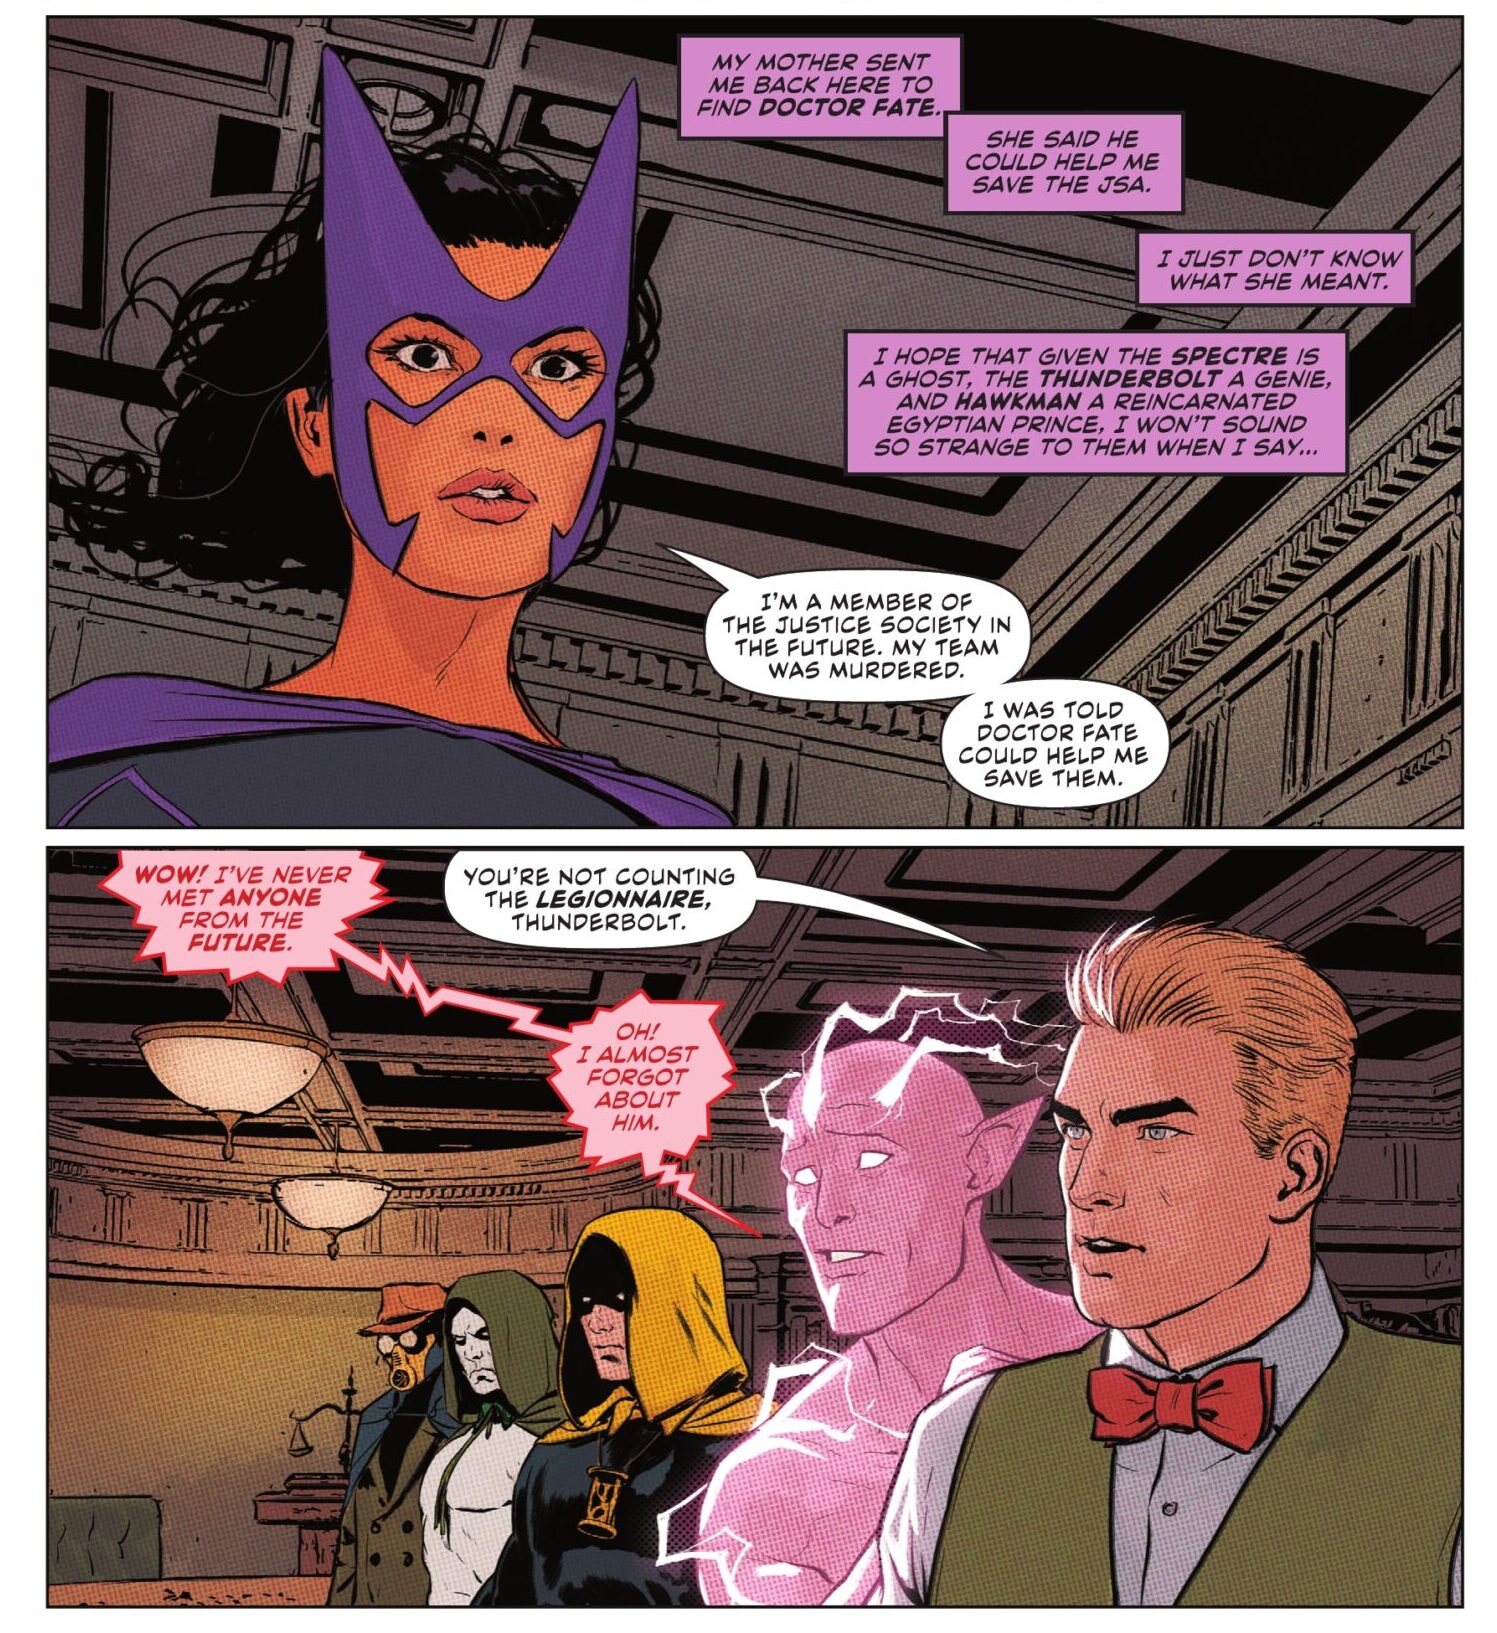 Justice Society of America #2 spoilers 4 Legionnaire